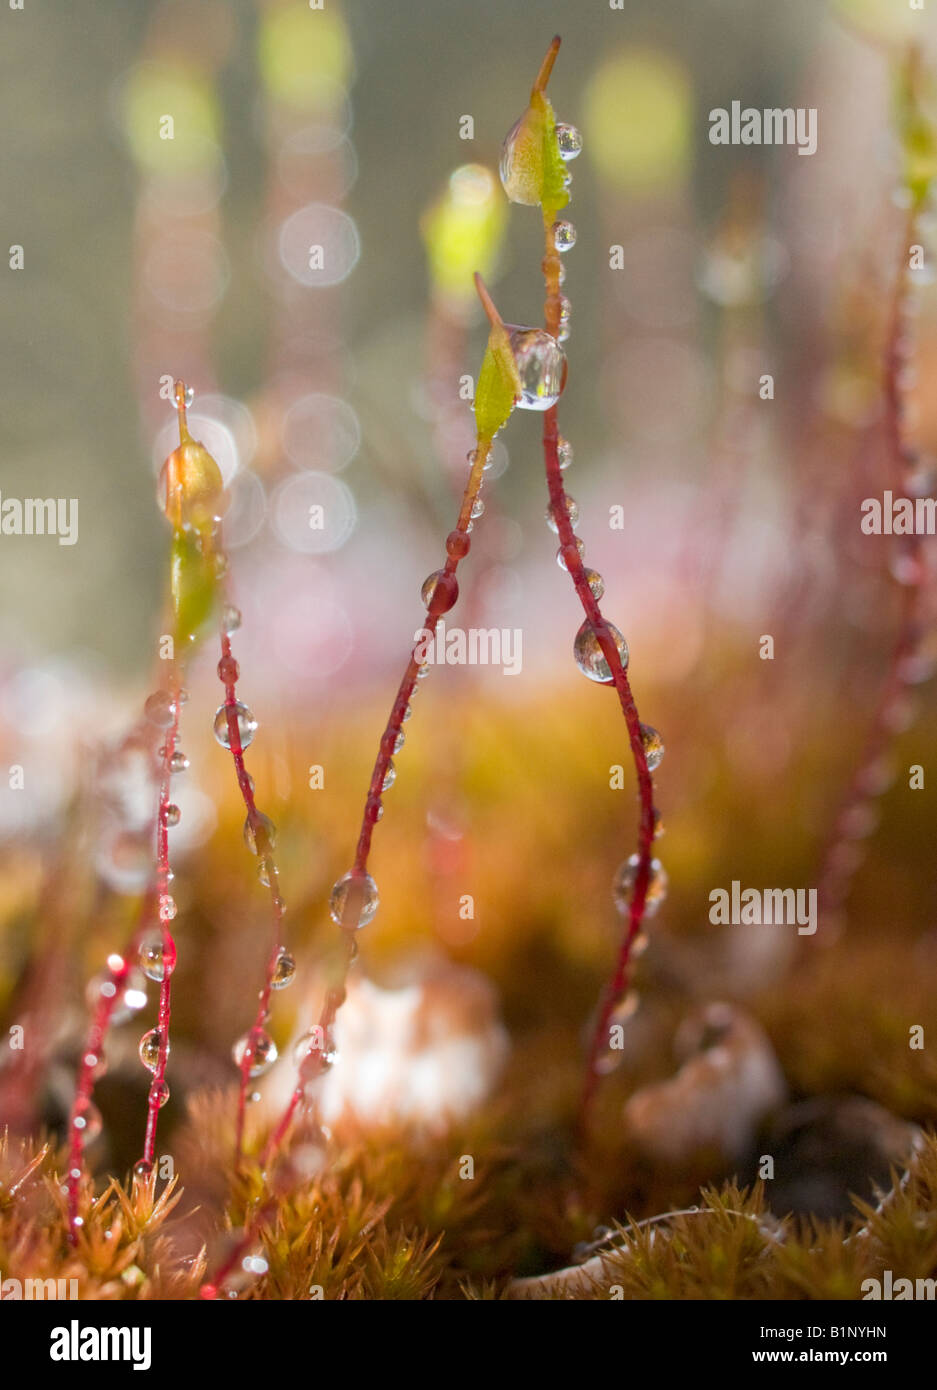 Moss in morning dew Stock Photo